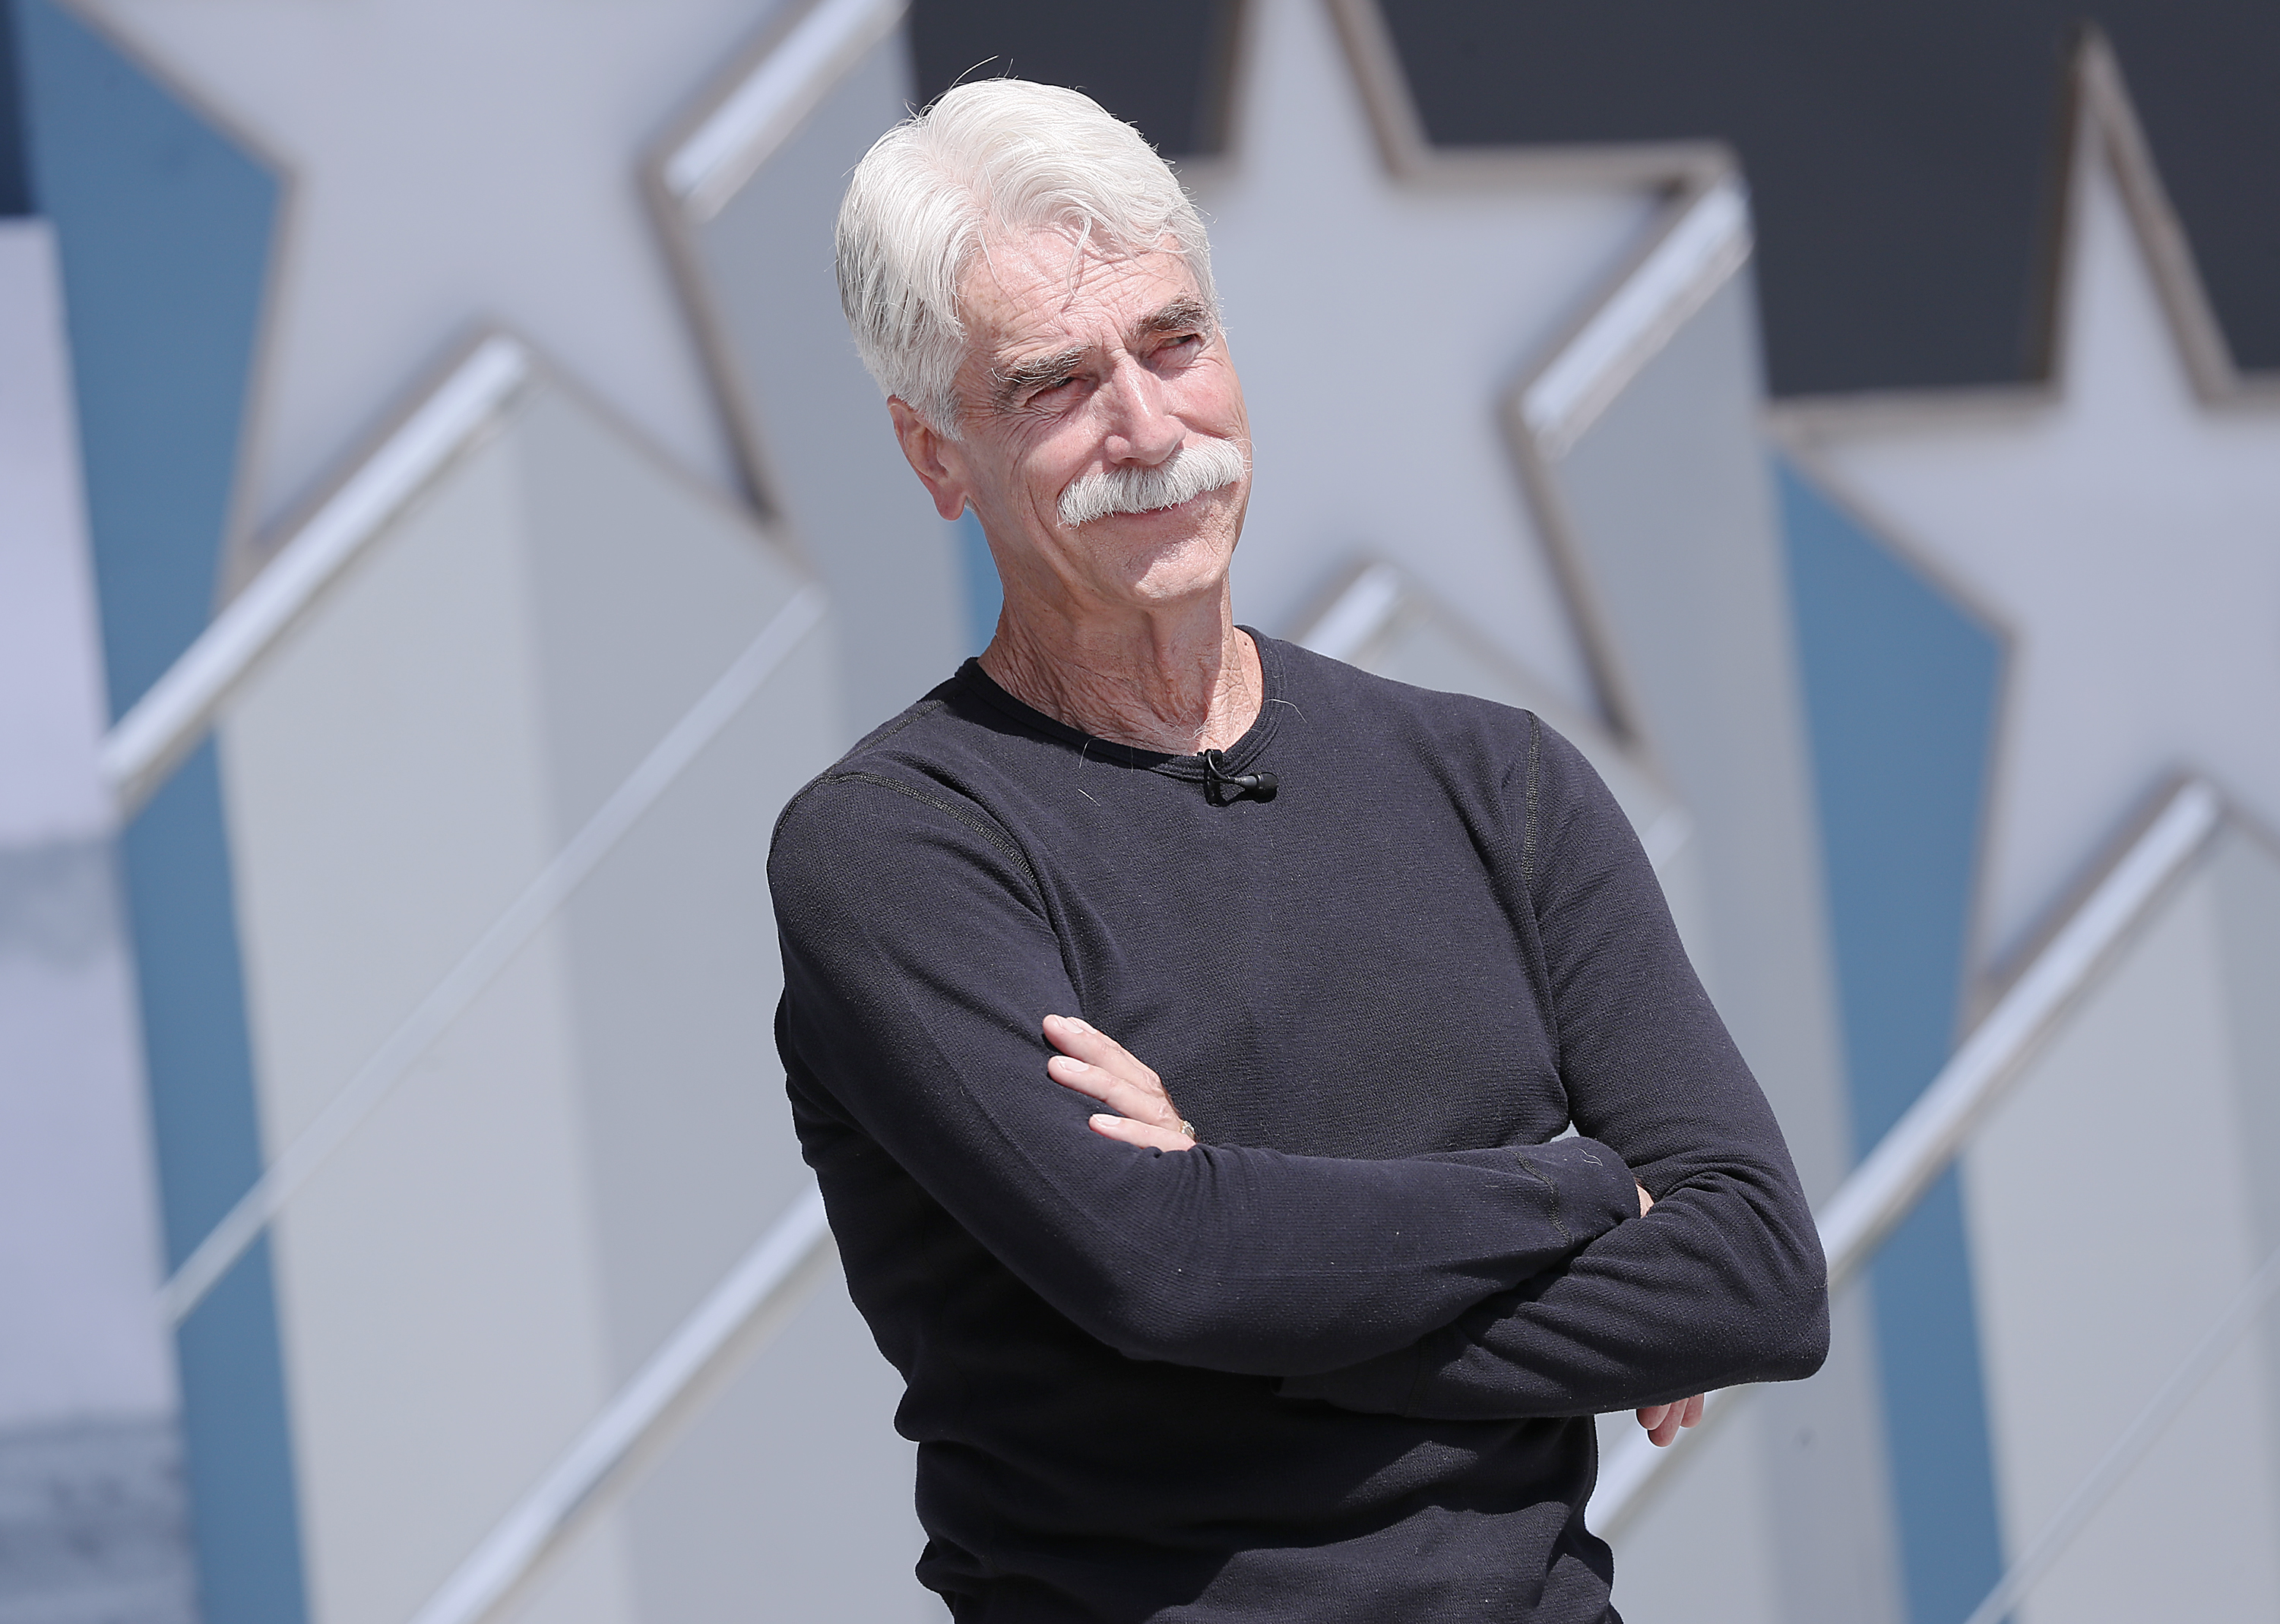 Sam Elliott onstage at the 2019 National Memorial Day Concert on May 25, 2019 in Washington, DC. | Source: Getty Images